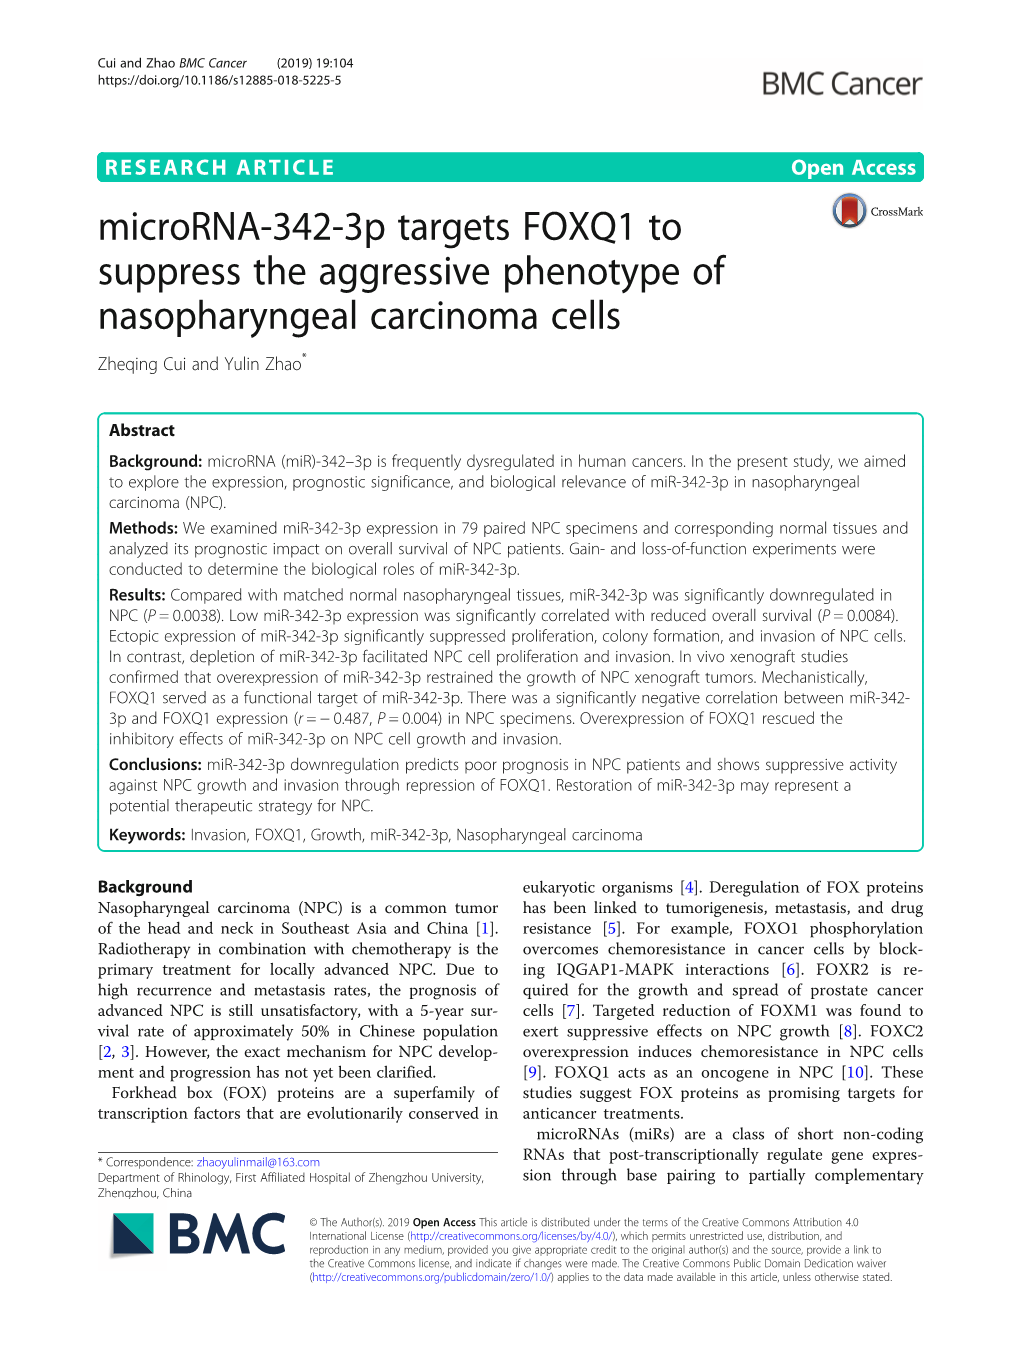 Microrna-342-3P Targets FOXQ1 to Suppress the Aggressive Phenotype of Nasopharyngeal Carcinoma Cells Zheqing Cui and Yulin Zhao*